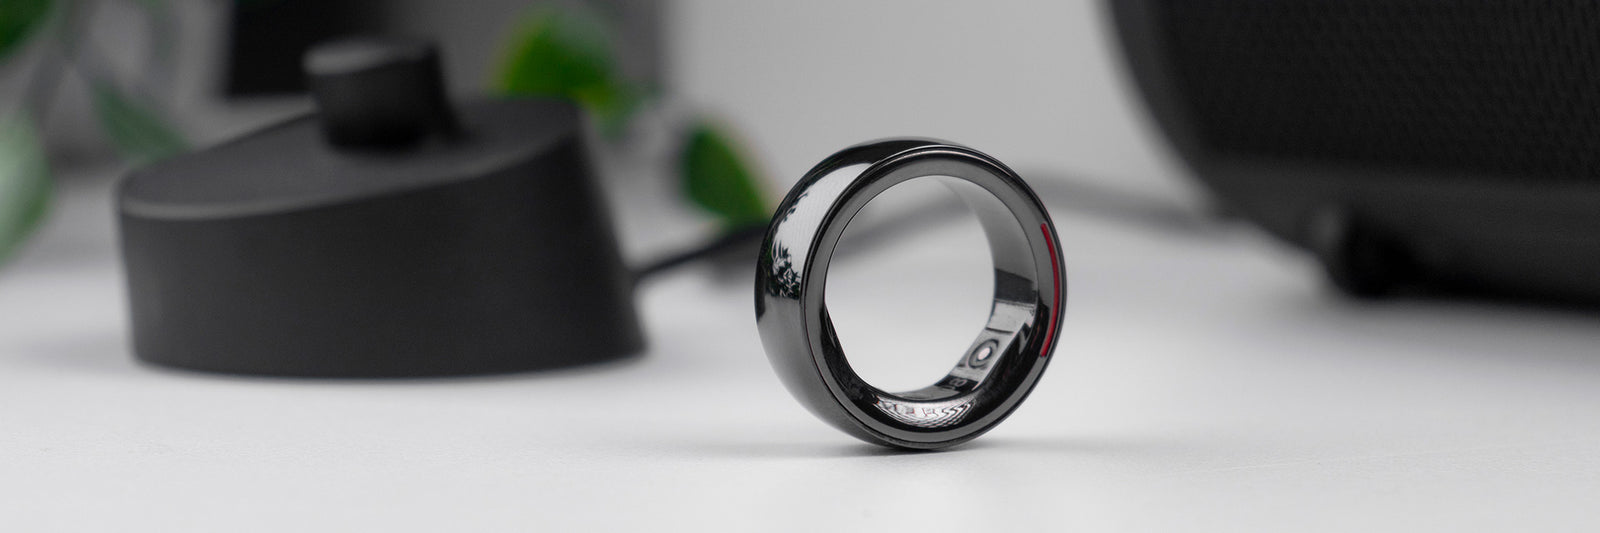 Gloring Smart Ring - Buy Now on the Official Store